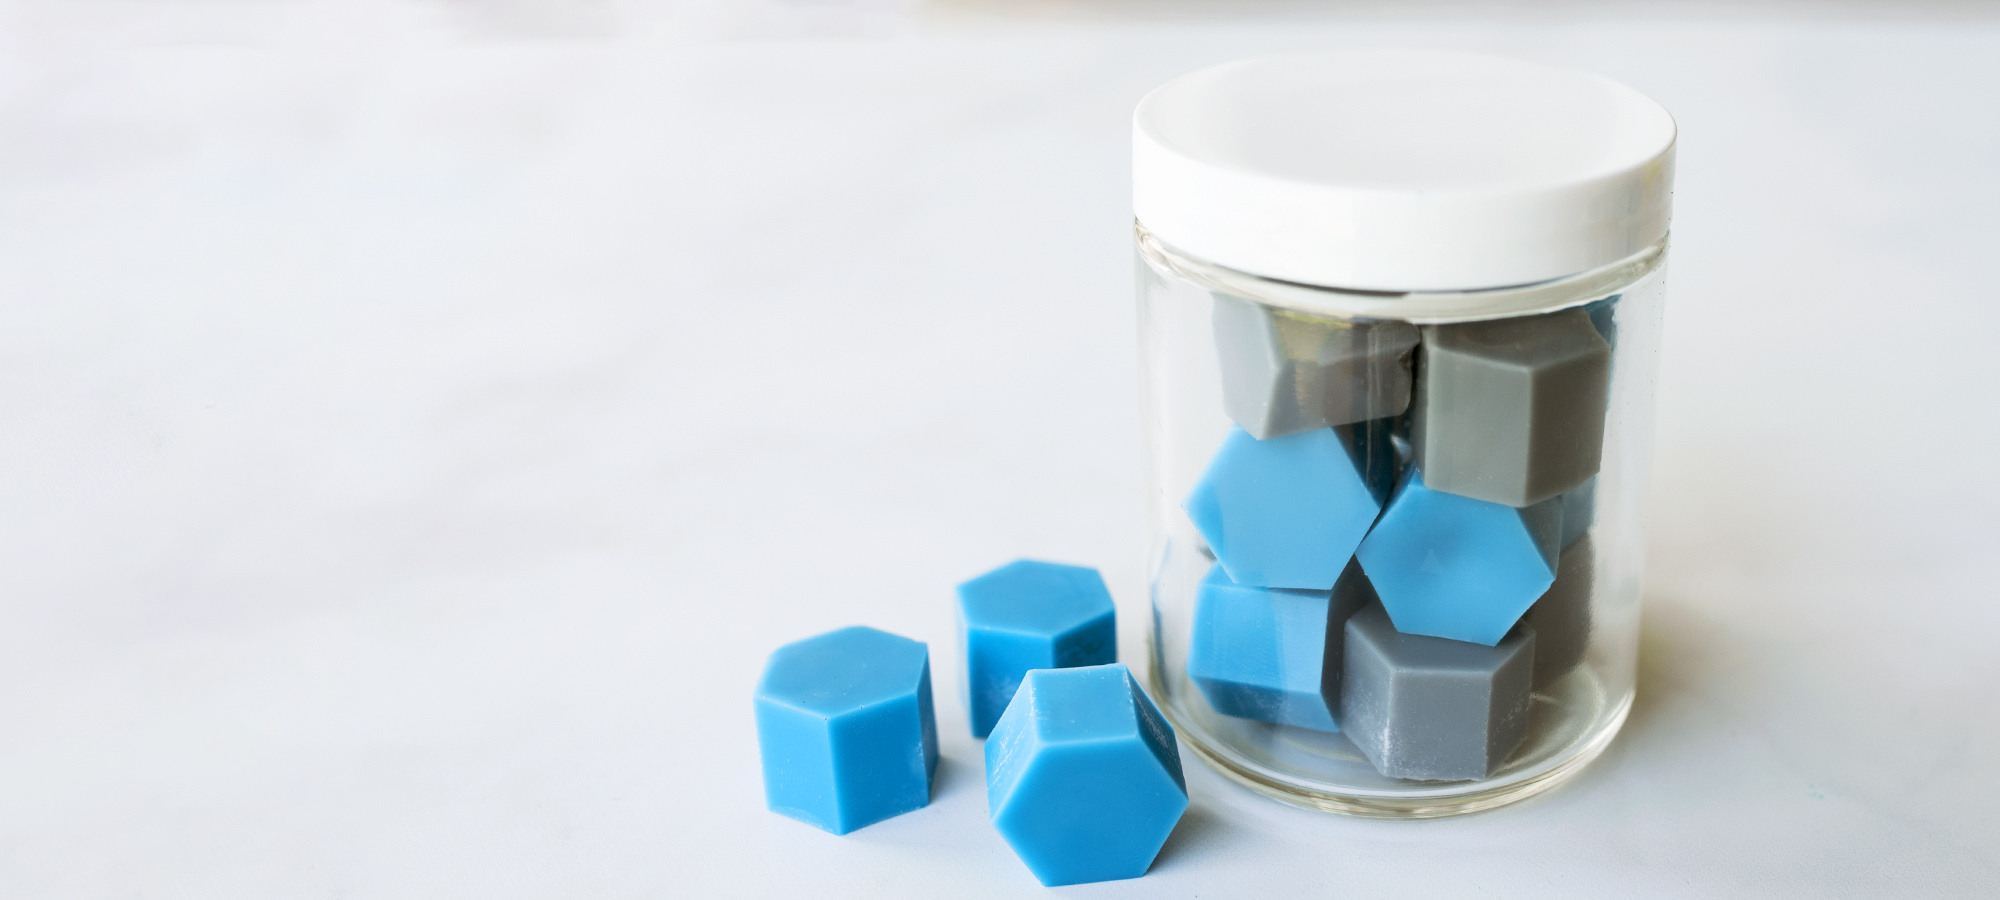 How to Make Soy Wax Melts - CandleScience